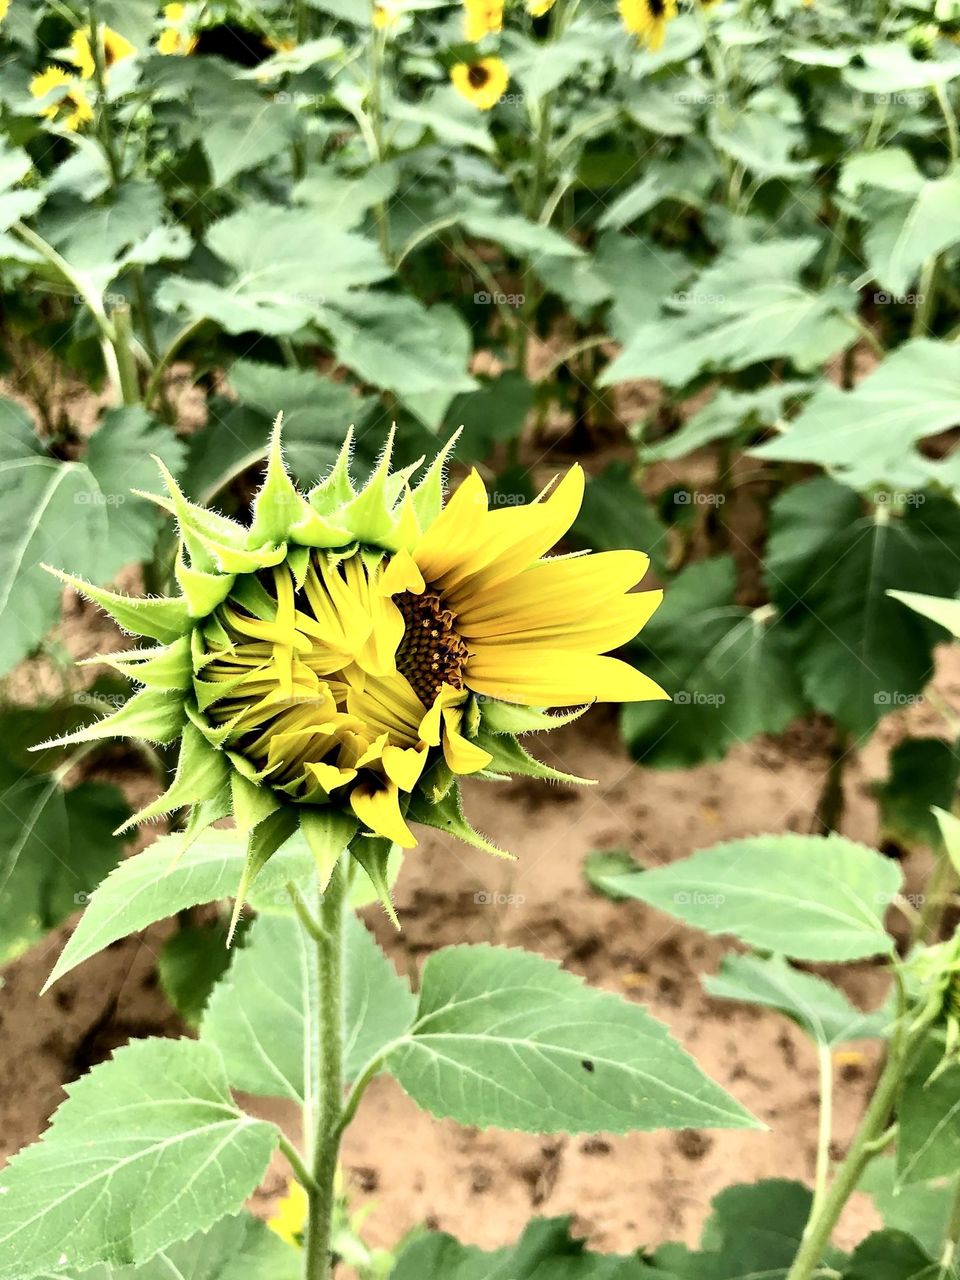 Summer sunflower taking its time to fully open, like it has a secret